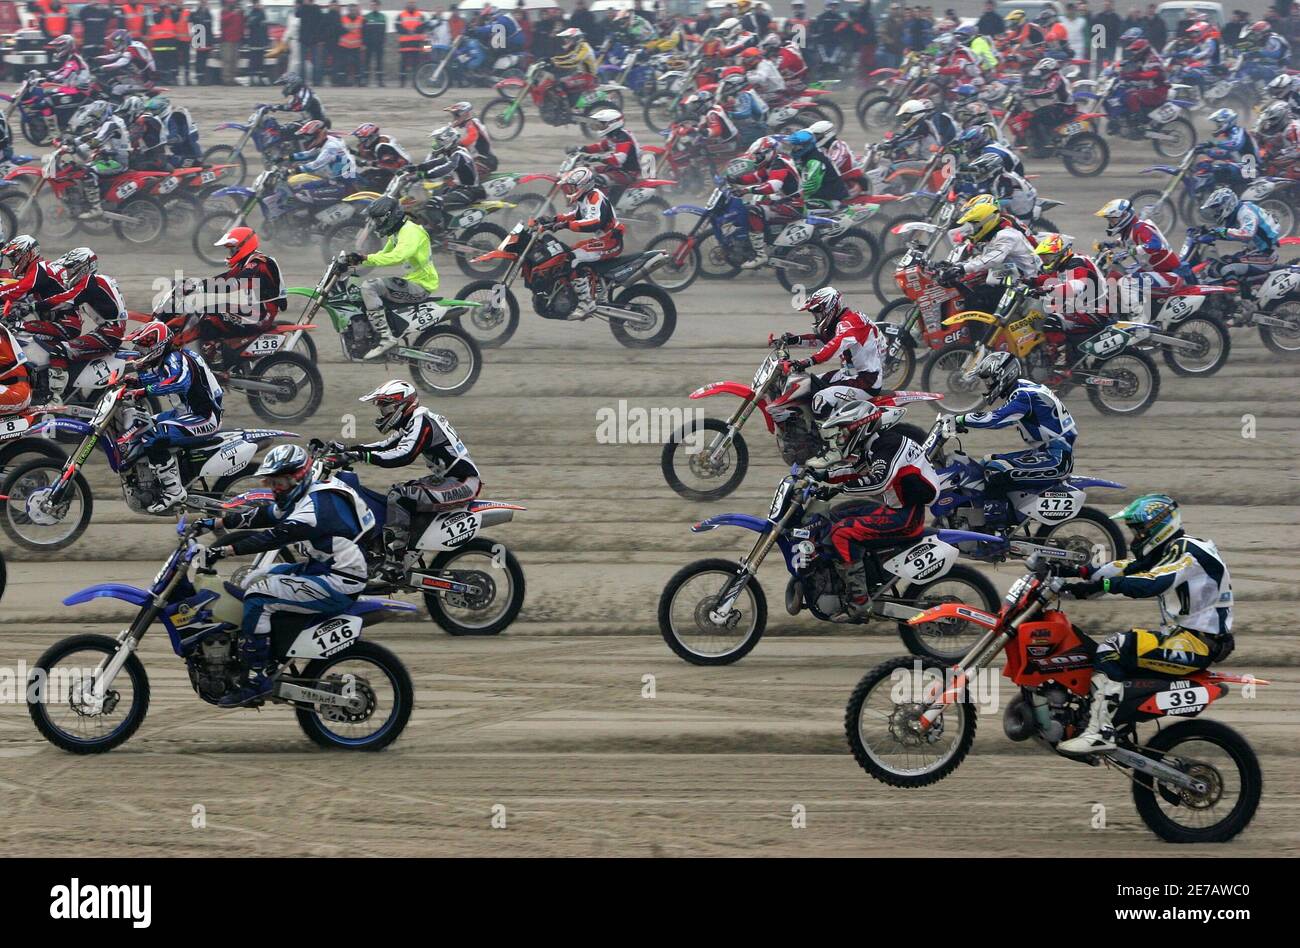 Bikers ride through a sandy beach as they take part in the first "Enduropale",  formally known as the "Enduro du Touquet" motorcycle endurance race, on the  beach of Le Touquet, northern France